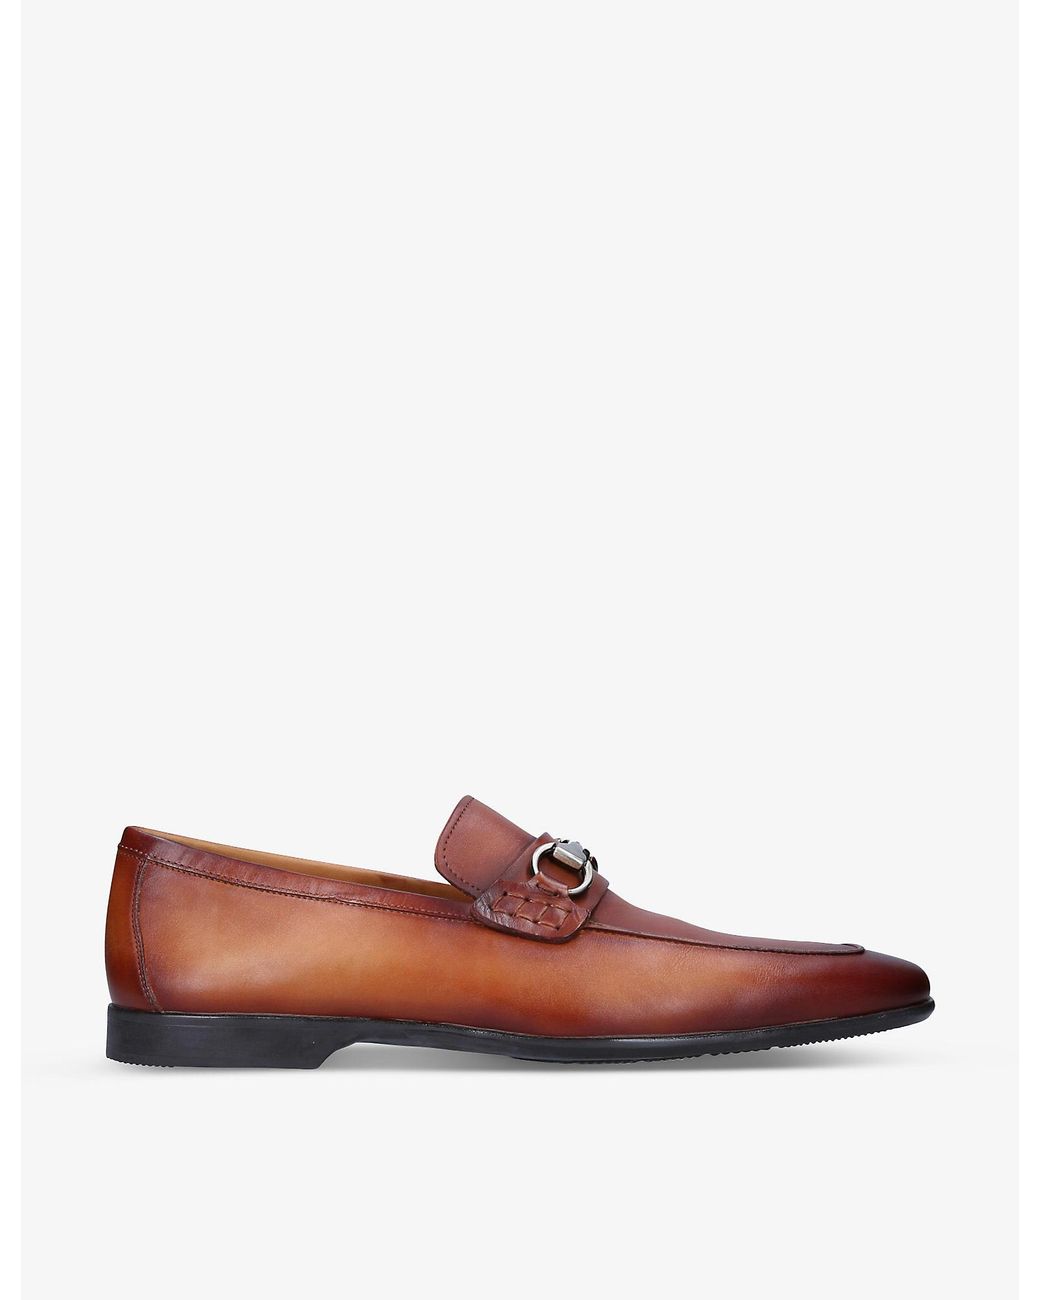 Magnanni Rafa Ii Horse-bit Leather Loafers in Natural for Men | Lyst